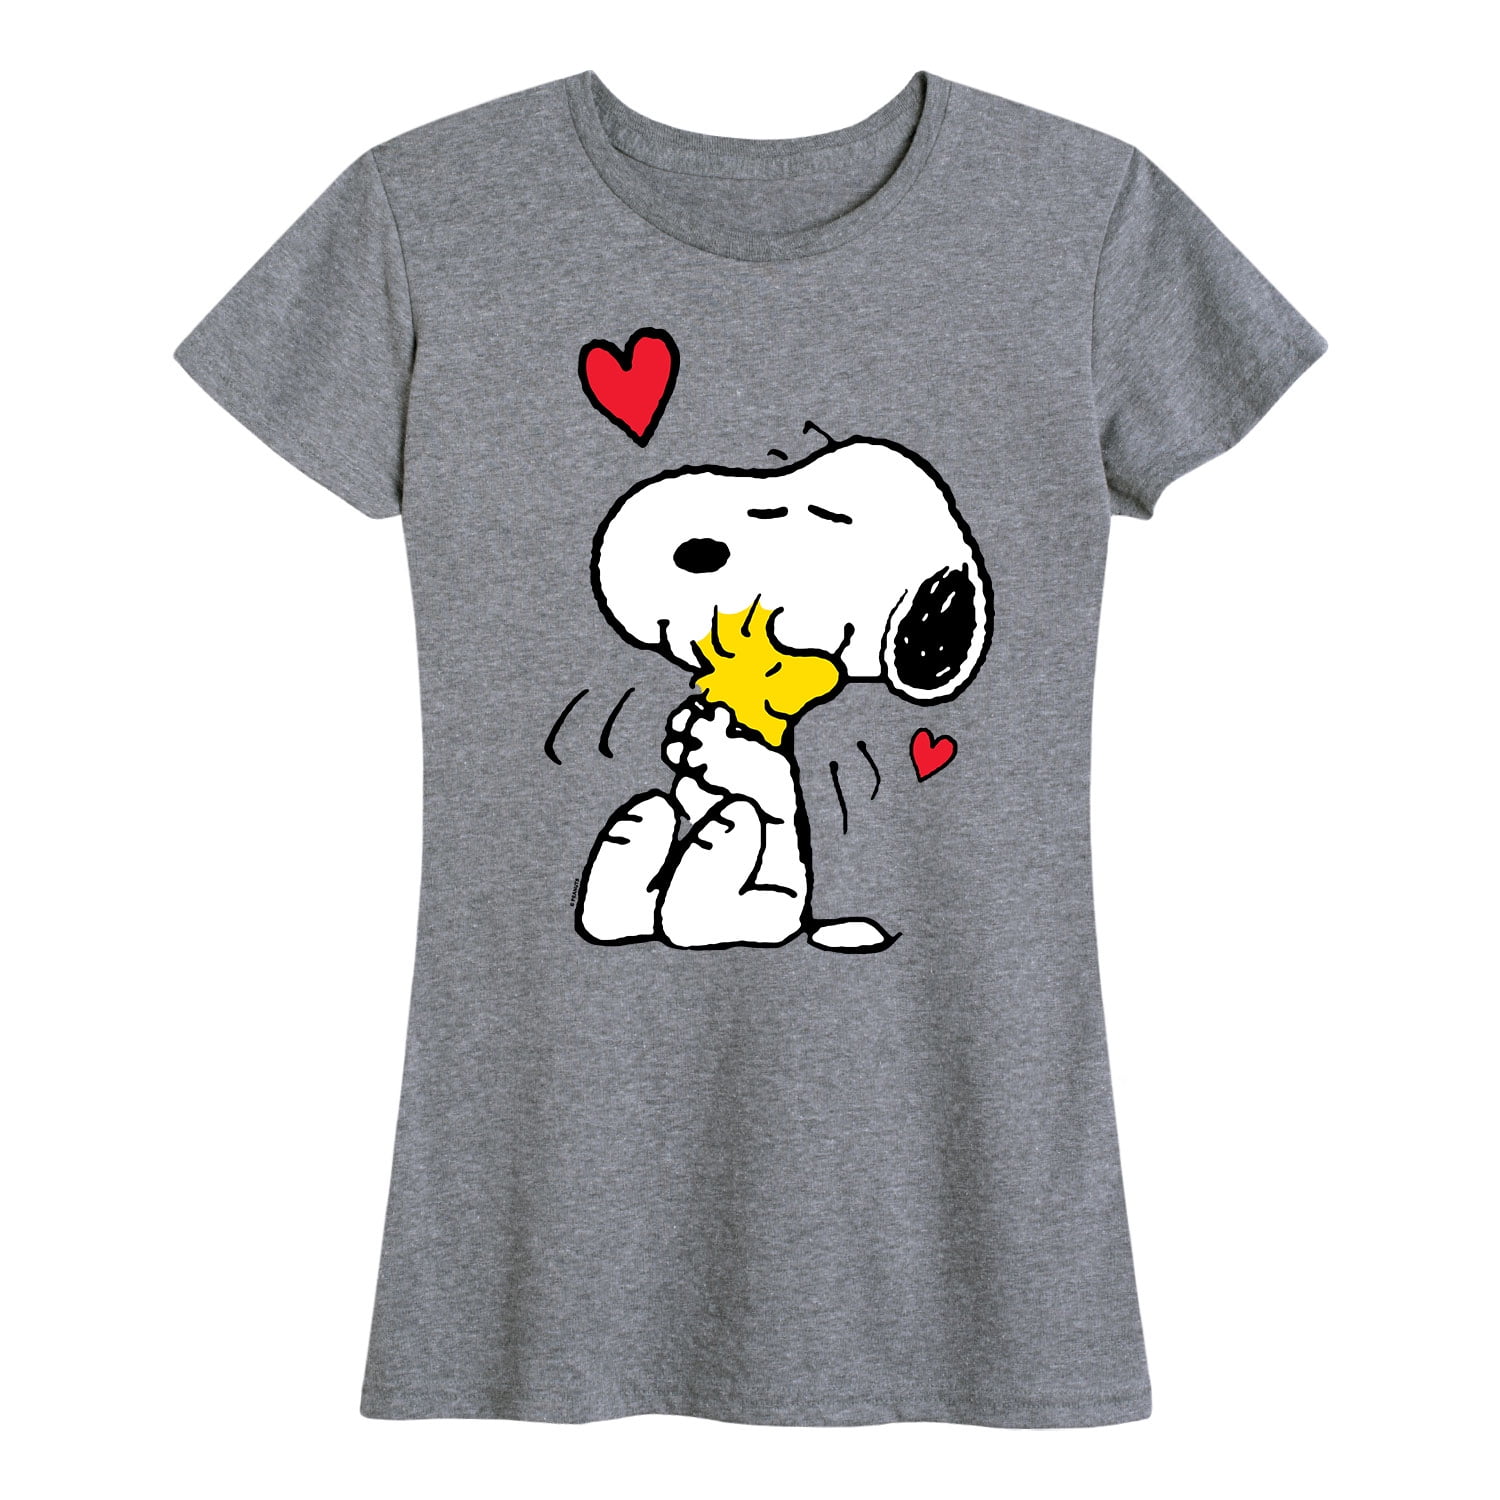 Peanuts - Faces of Snoopy - Women\'s Short Sleeve Graphic T-Shirt